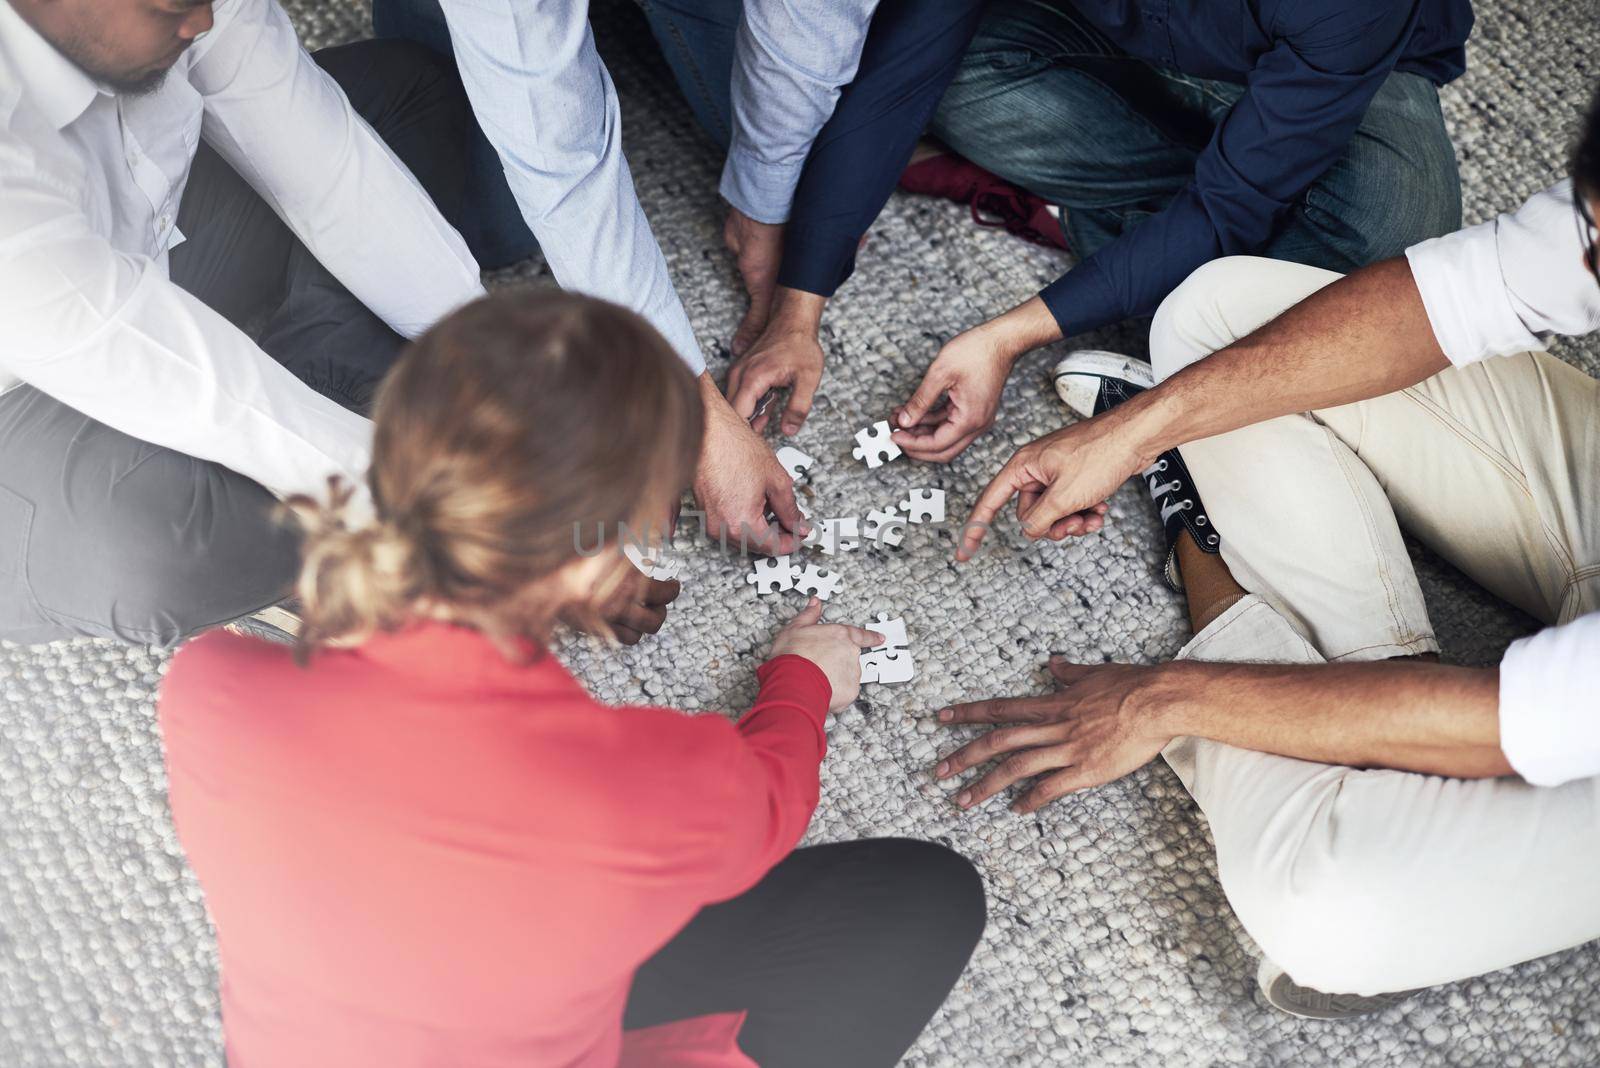 They love it when a plan comes together. High angle shot of a group of unidentifiable businesspeople building a puzzle together while sitting on a carpet in the office